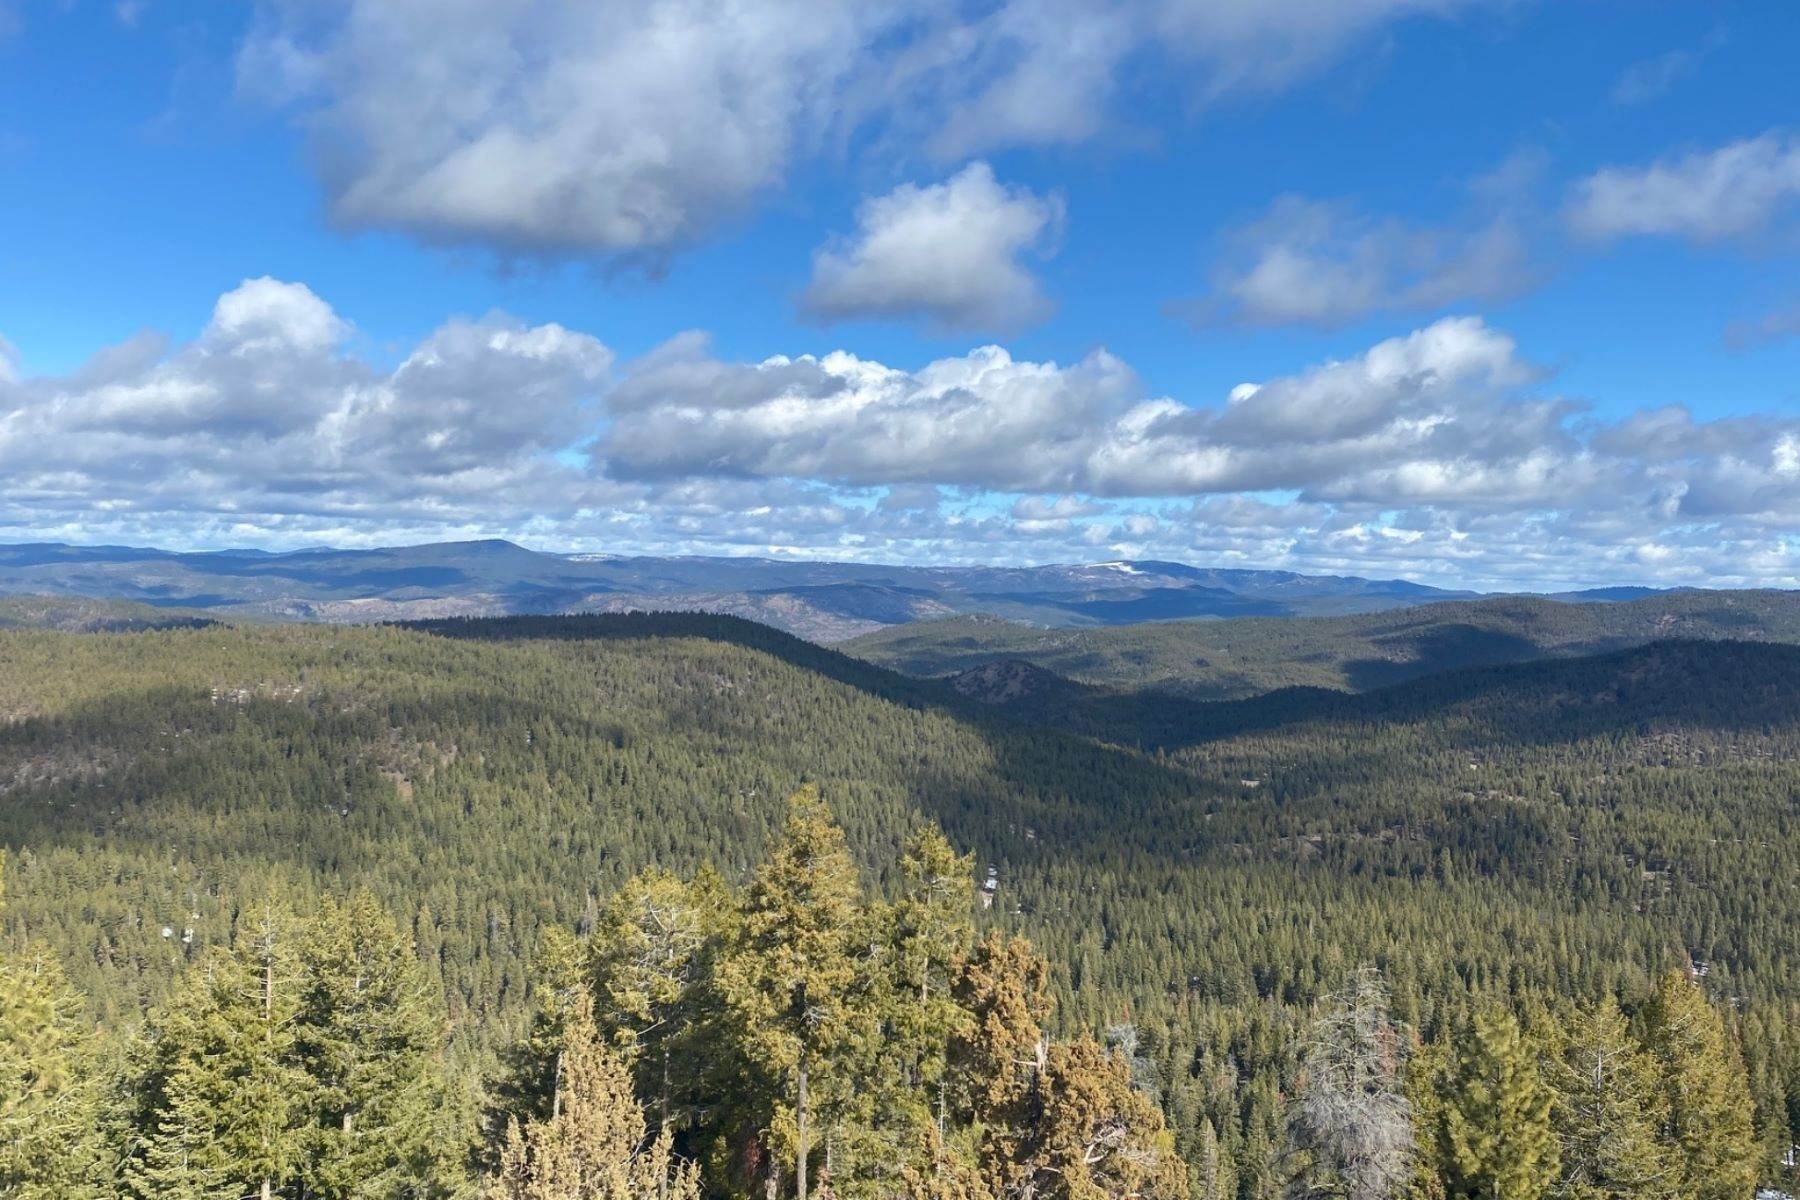 Farm and Ranch Properties for Sale at 27850 NE Old Wolf Creek Road Prineville, OR 97754 Prineville, Oregon 97754 United States